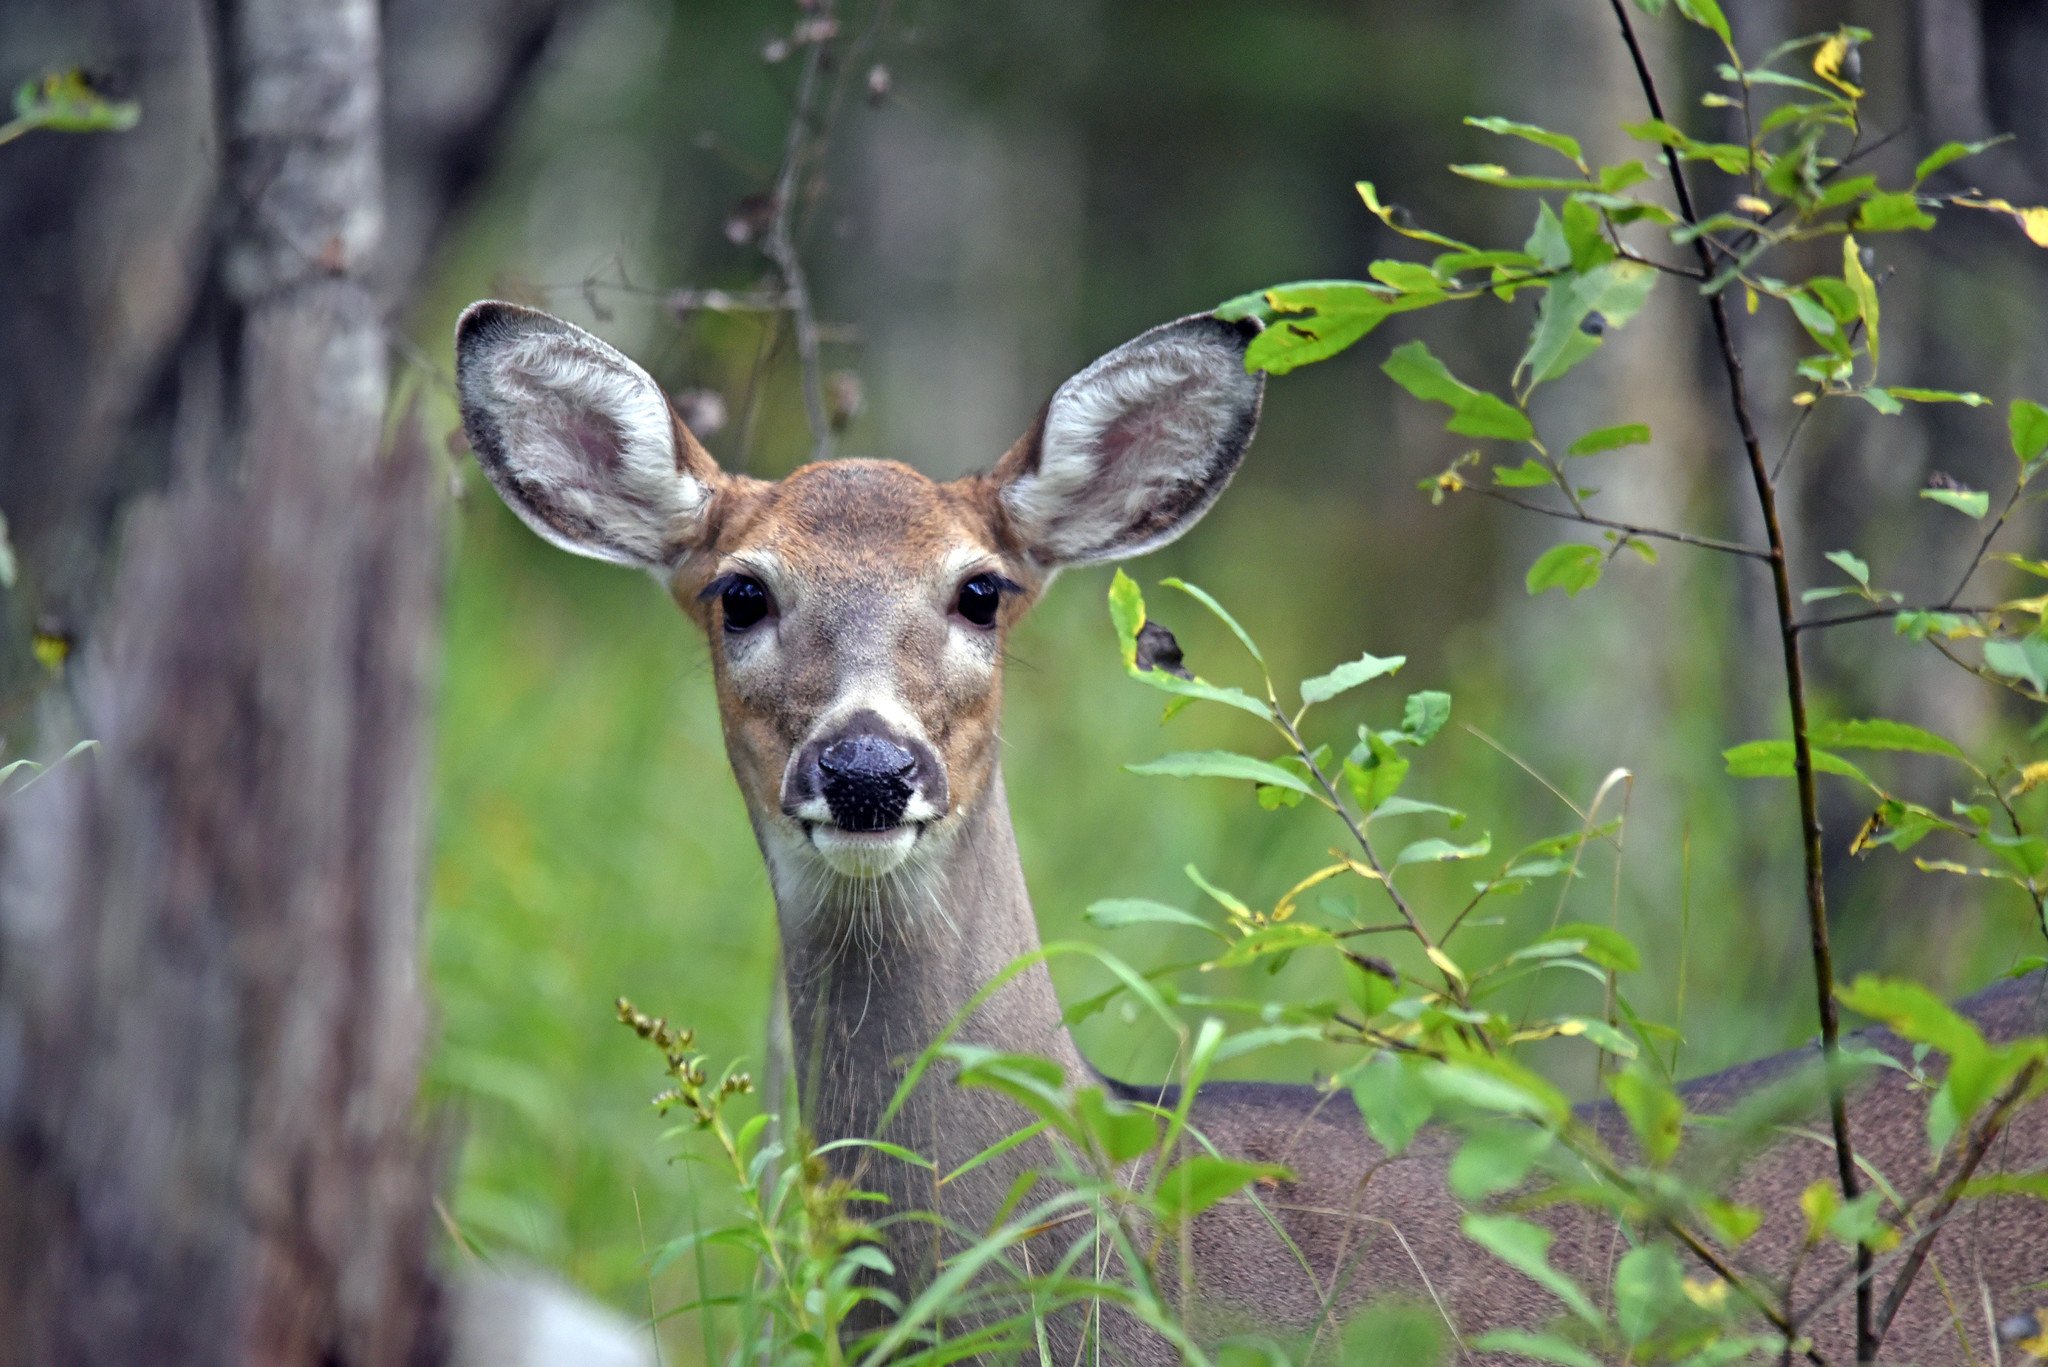 A female white-tail deer looks directly at the photographer.